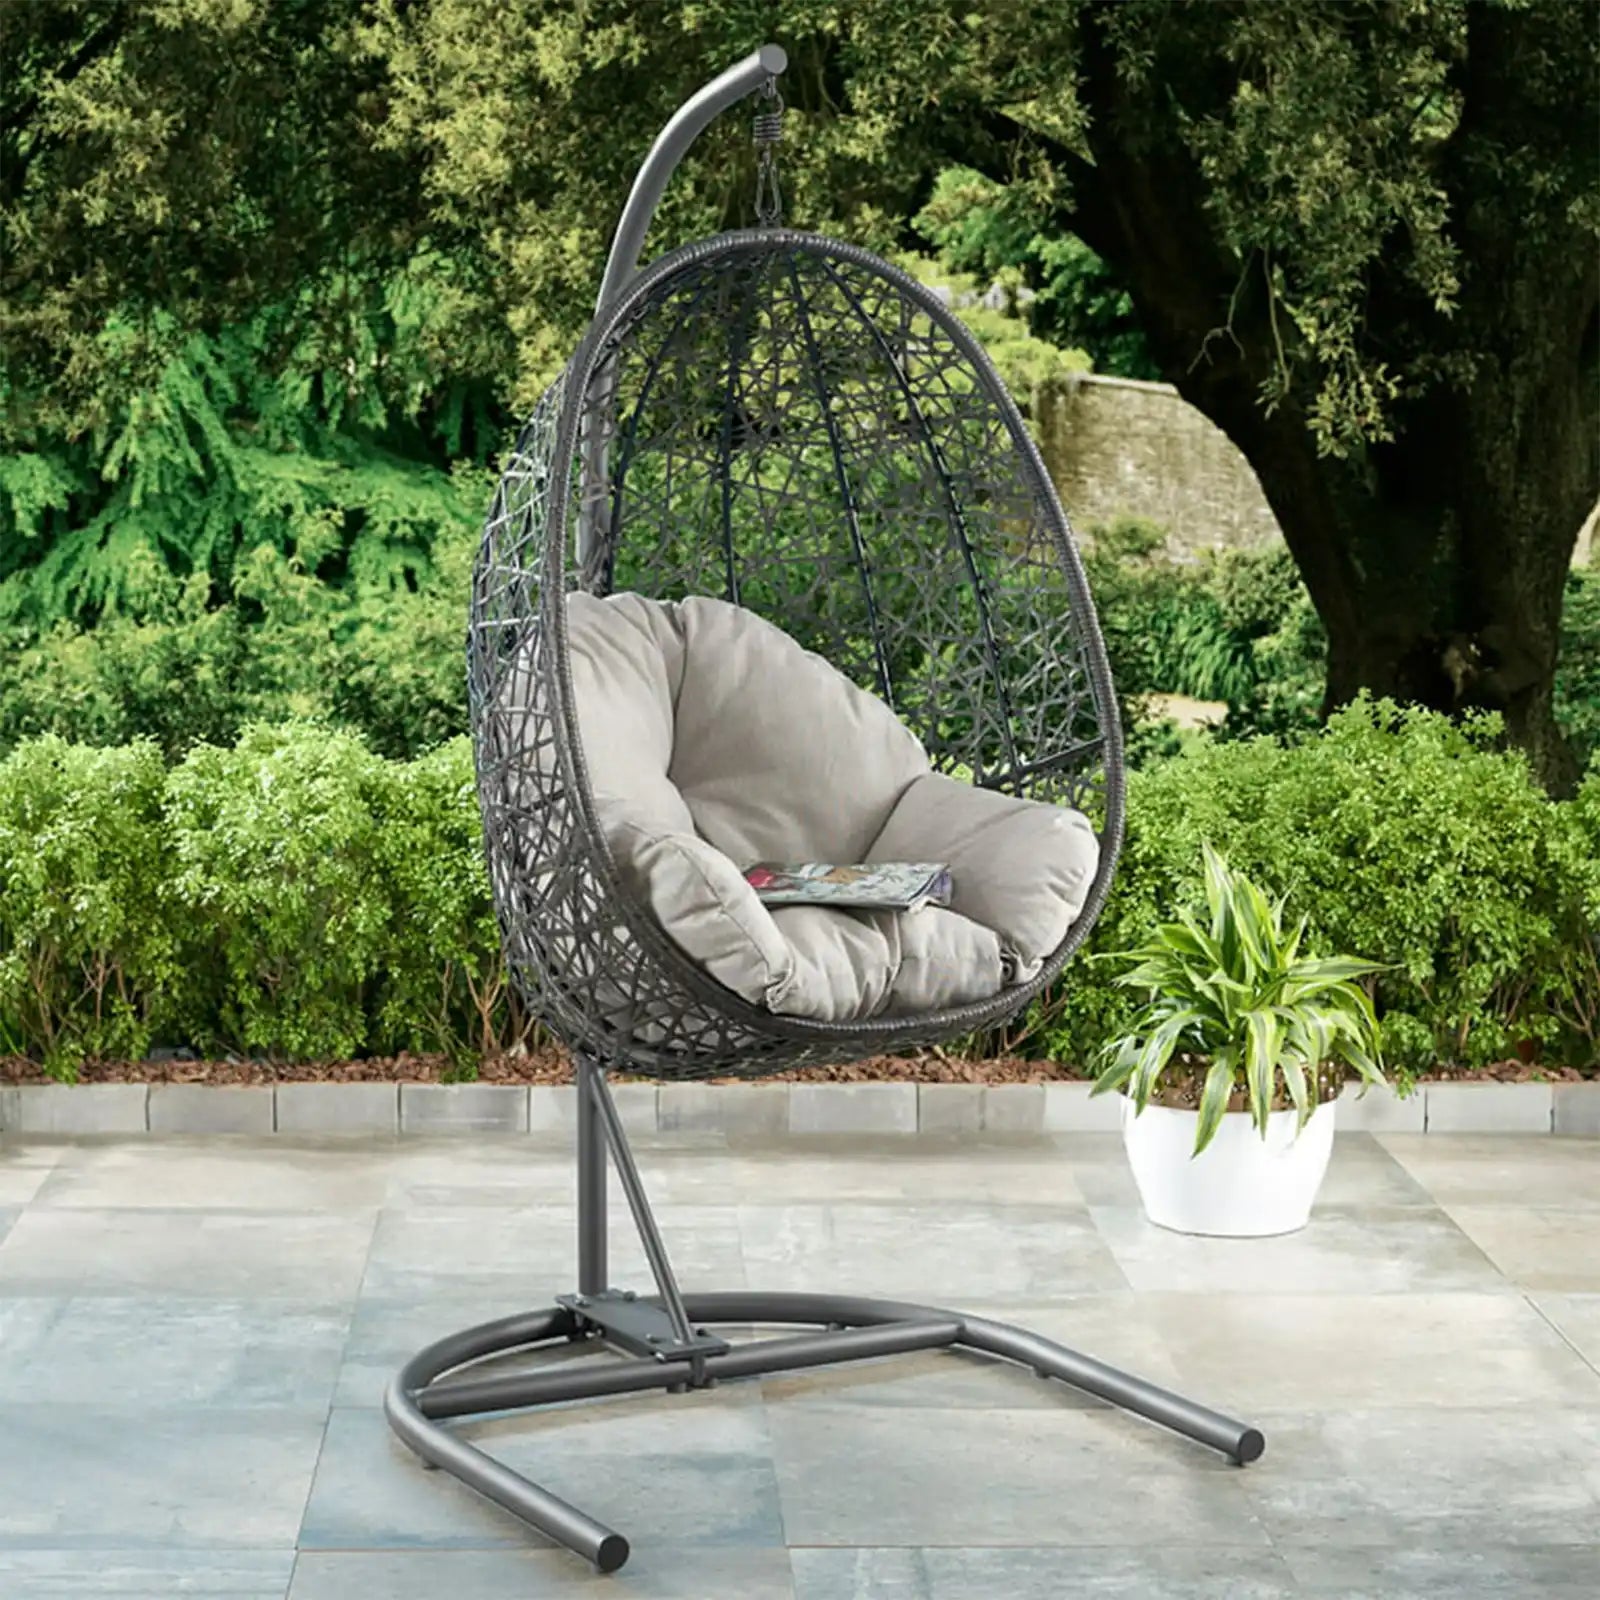 Patio Wicker Hanging Egg Chair with Stand and Cushion